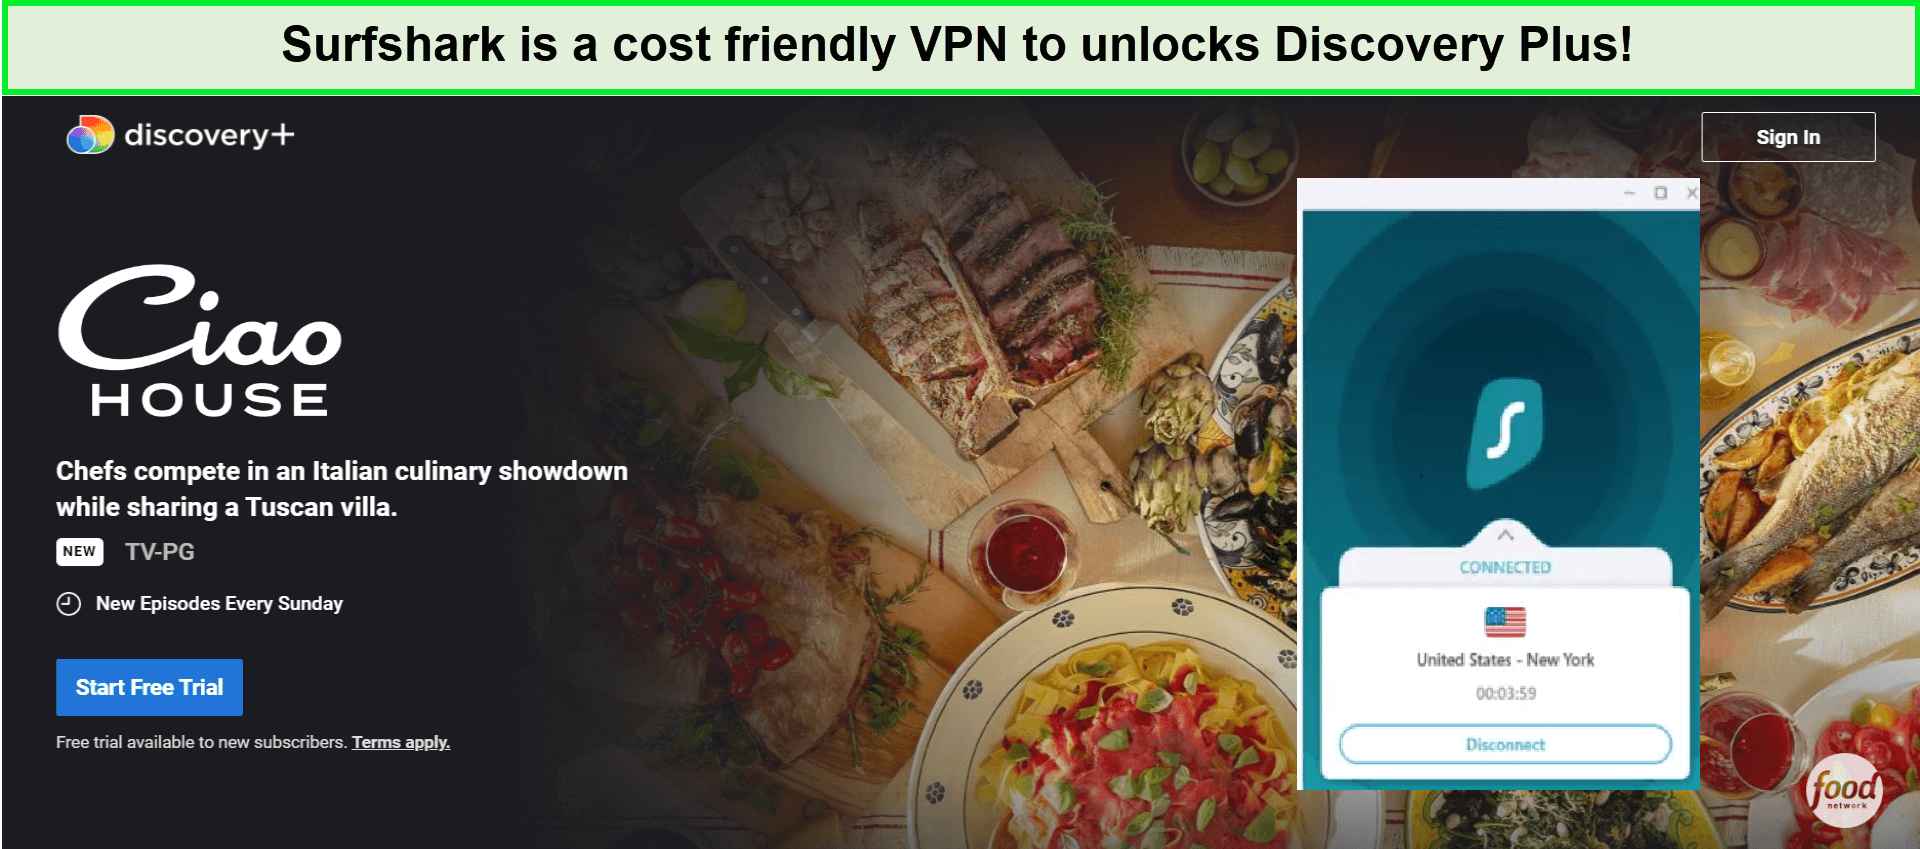 budget-friendly-vpn-for-discovery-plus